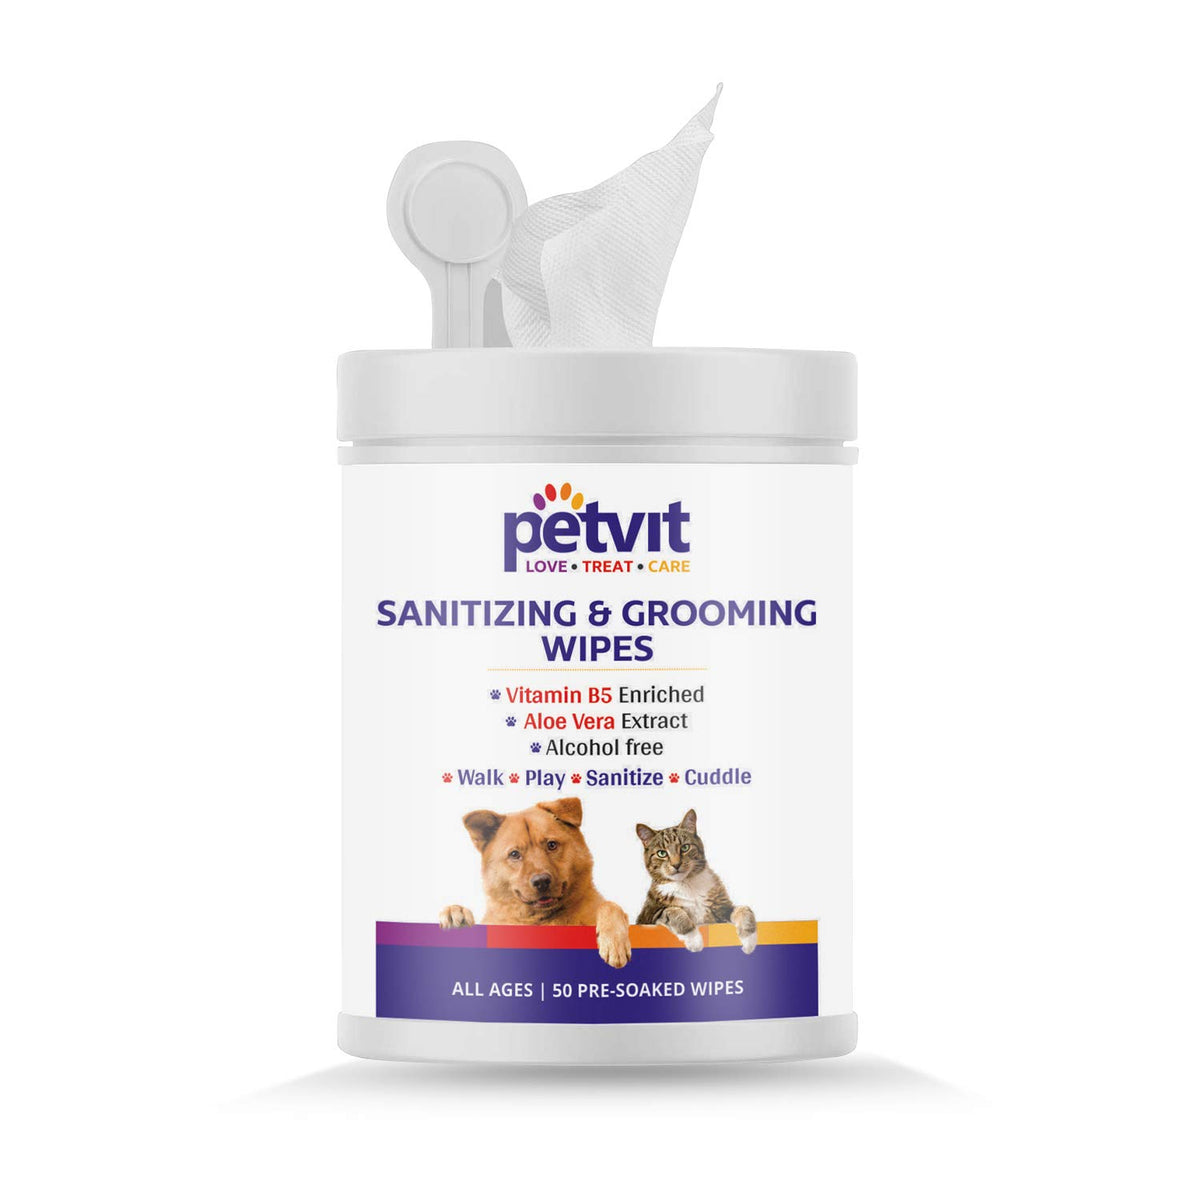 Petvit Cleansing & Grooming Wipes for Dog and Cat Enriched with Vitamin B5 and Aloe Vera, 50 Wipes Piece